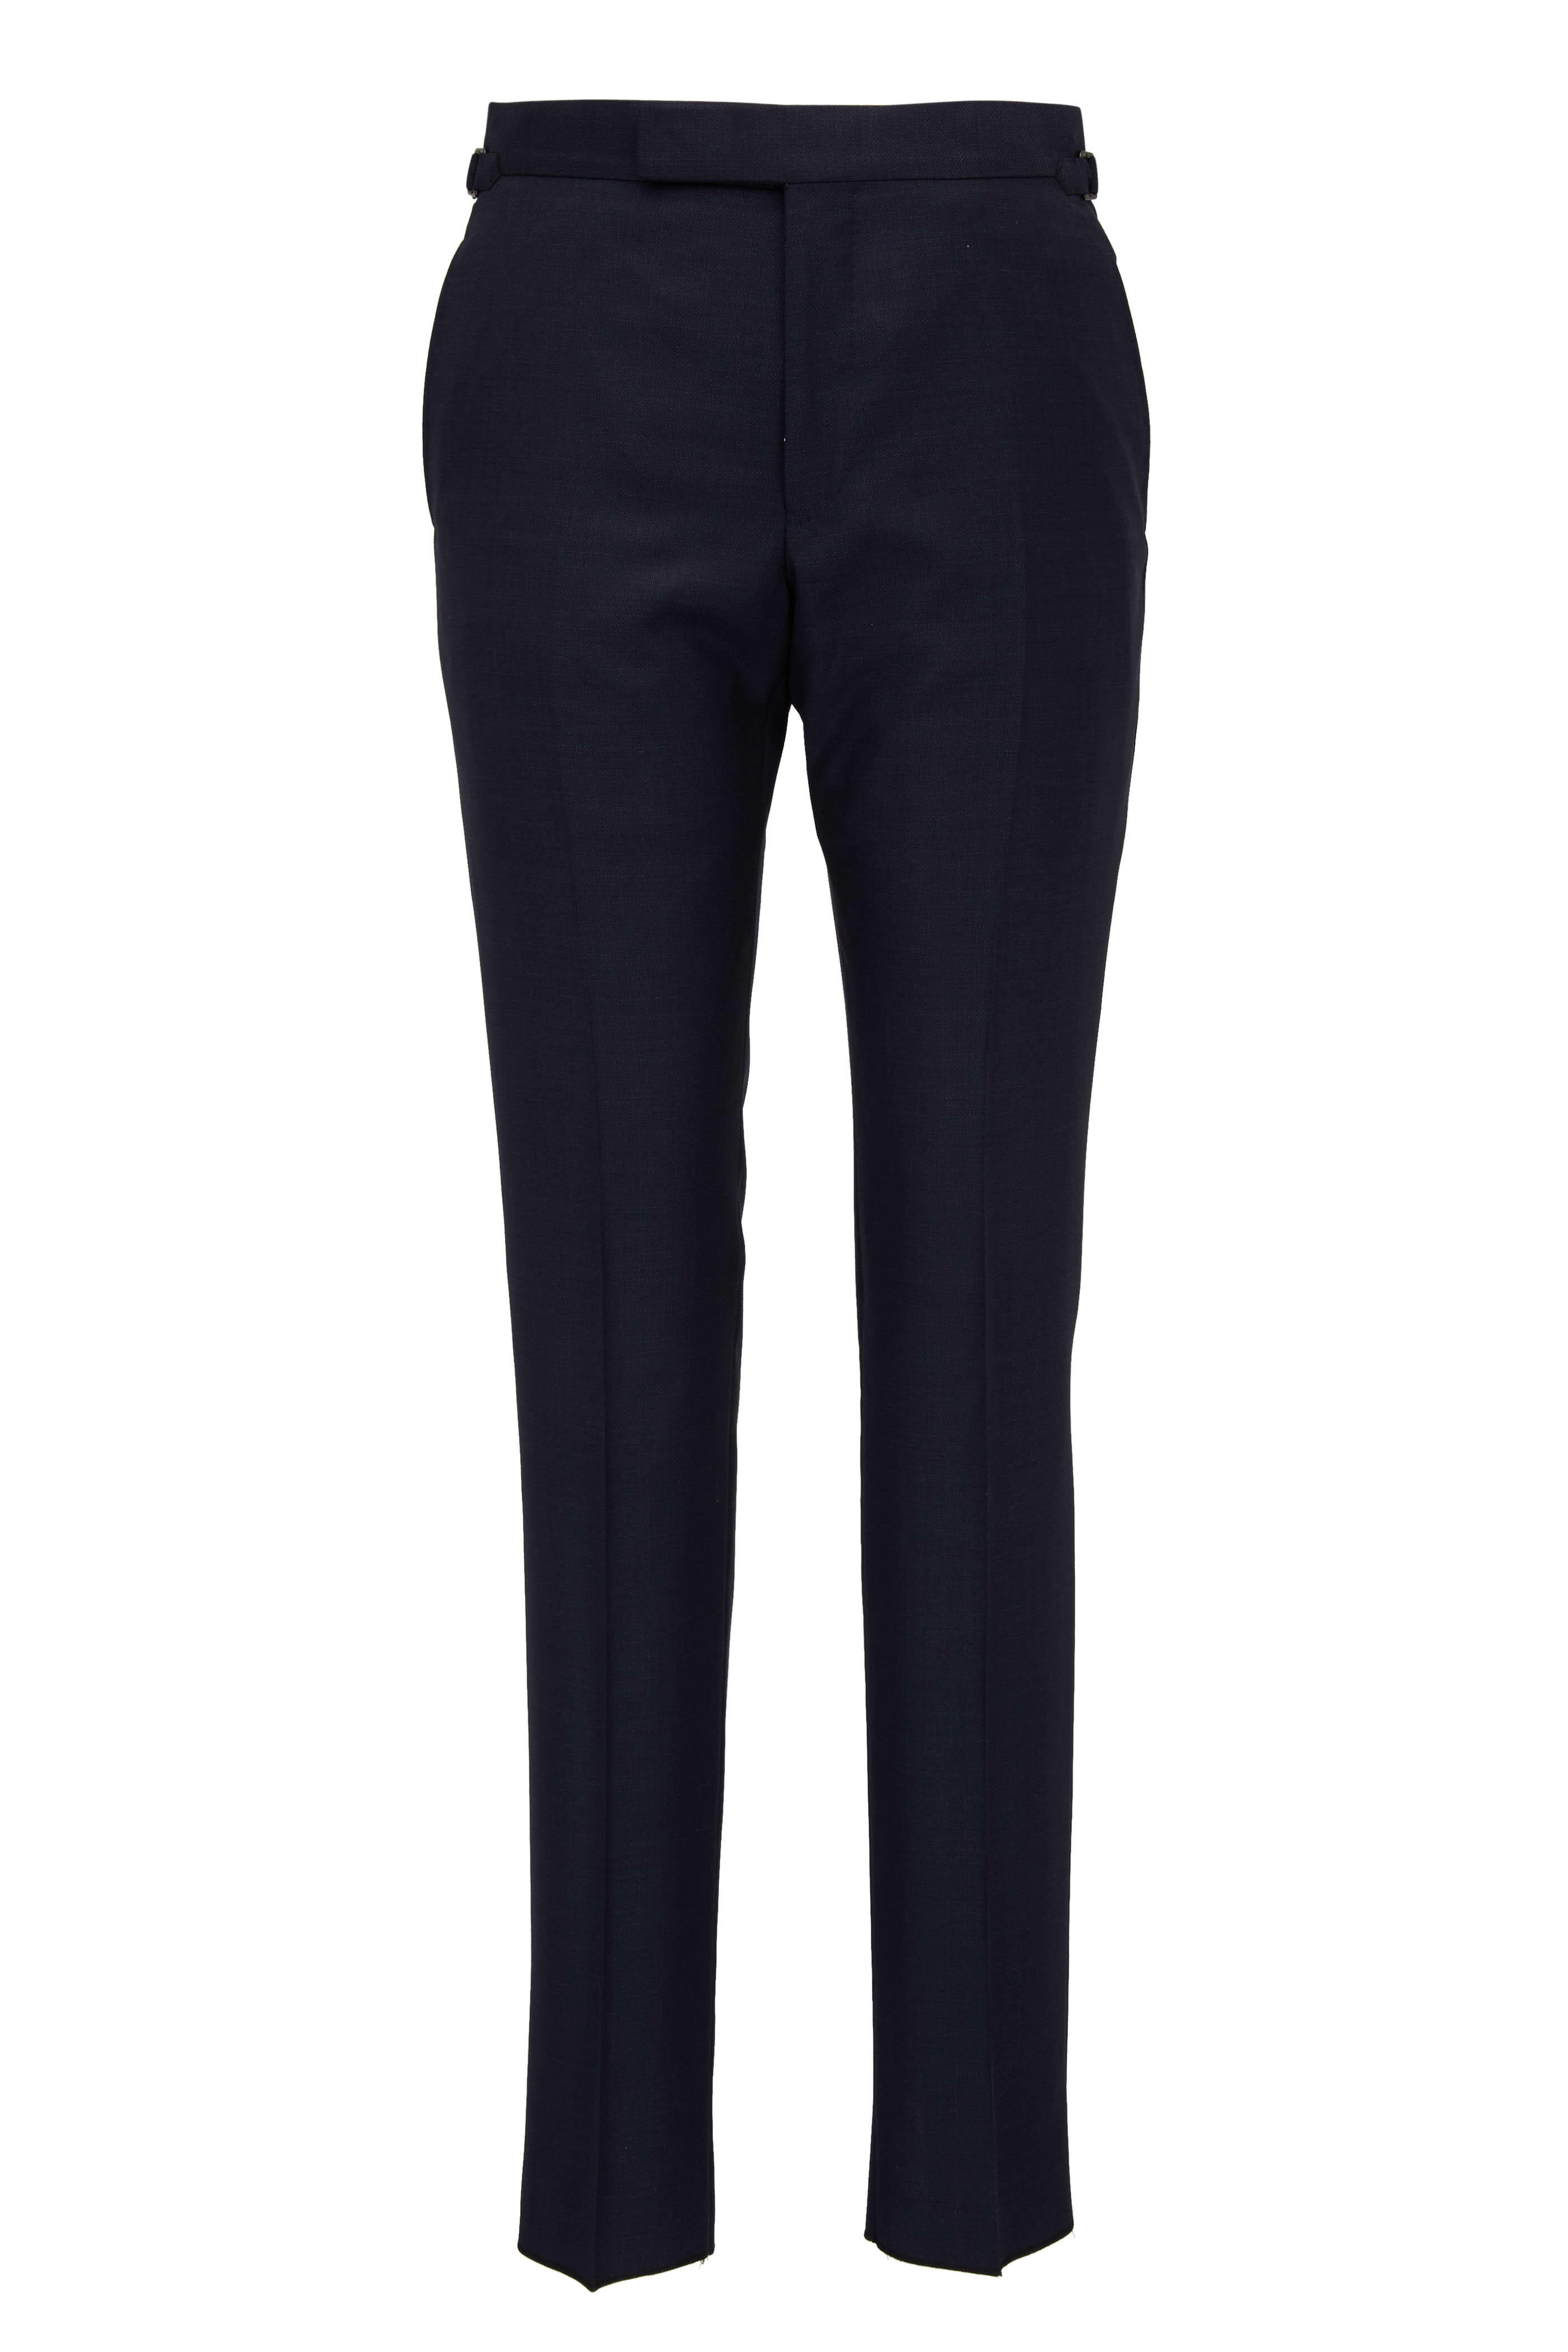 Tom Ford - O'Connor Dark Navy & Charcoal Micro Dot Suit